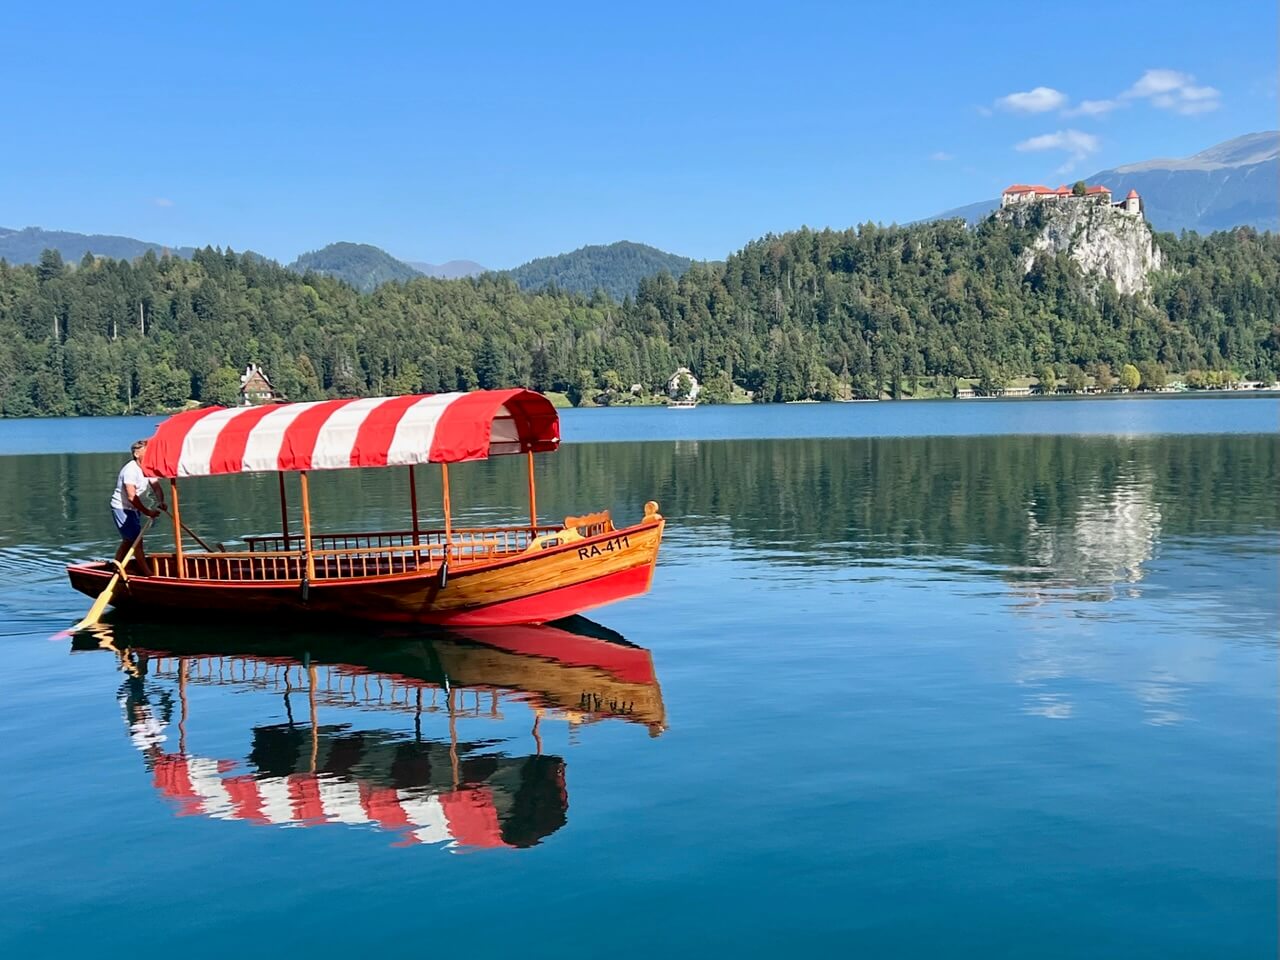 Hosts Global | Discover Slovenia boat ride on Lake Bled